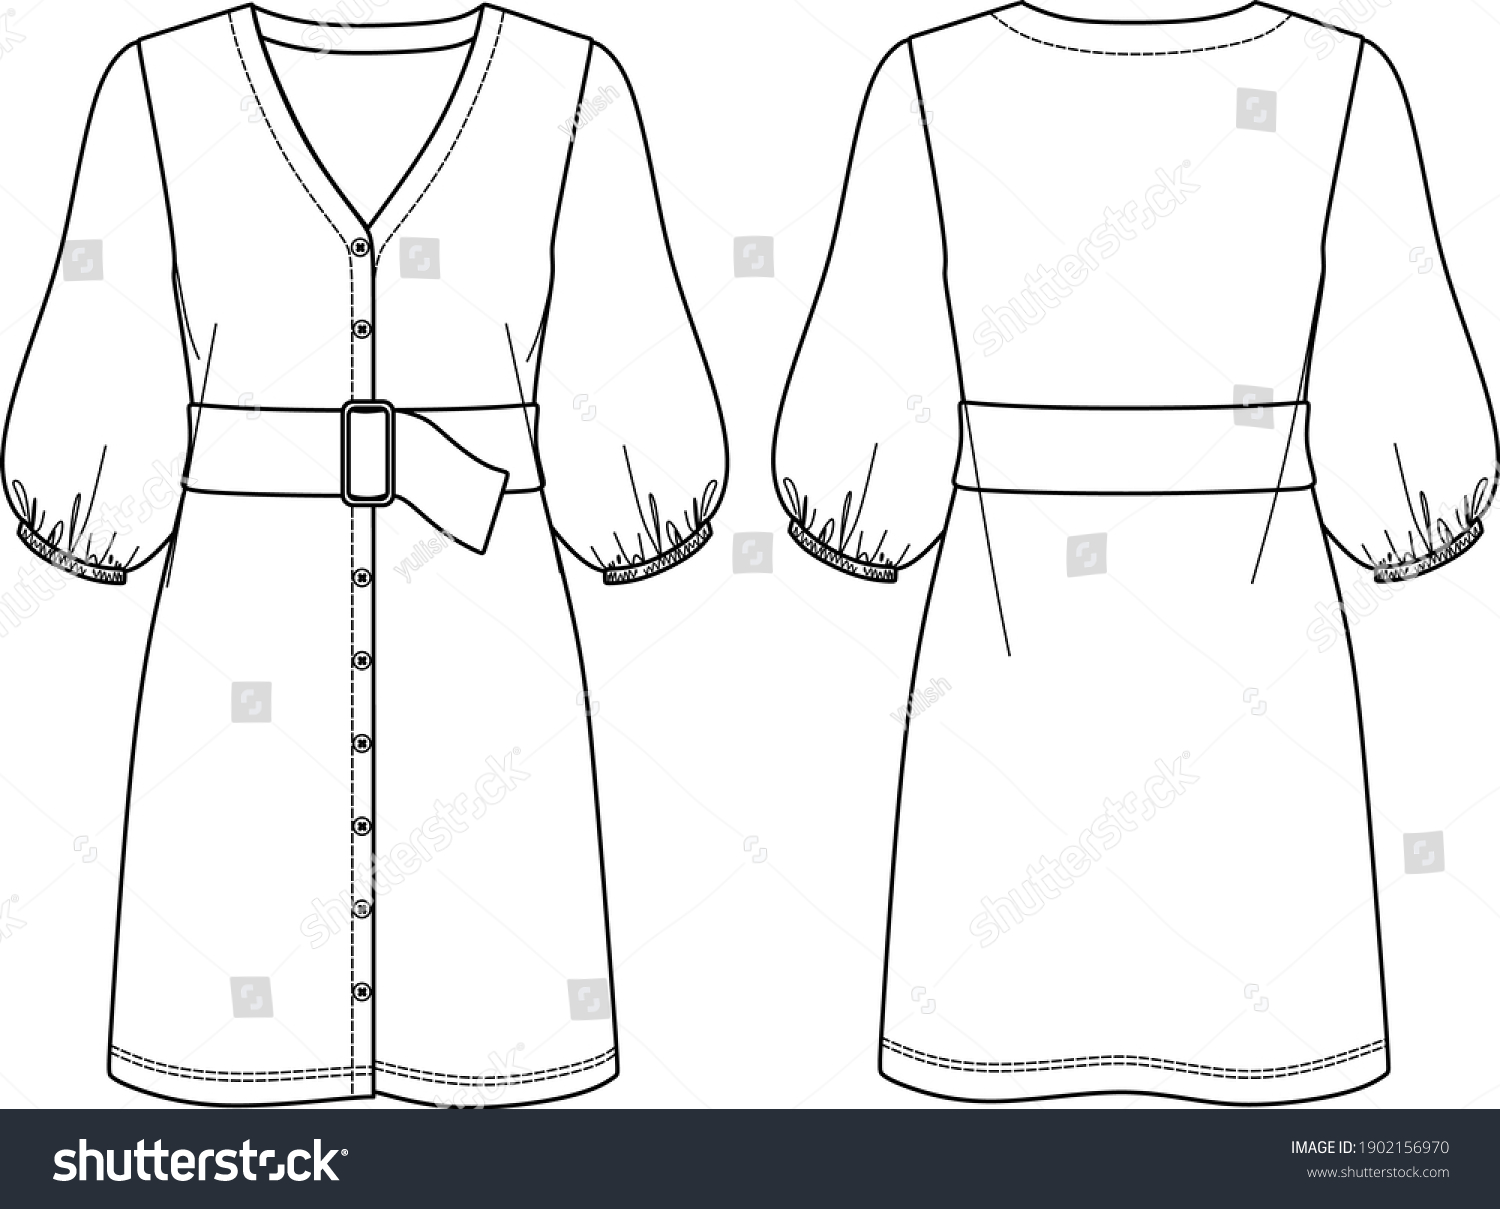 Vector Technical Drawing Dress Fashion Cad Stock Vector (Royalty Free ...